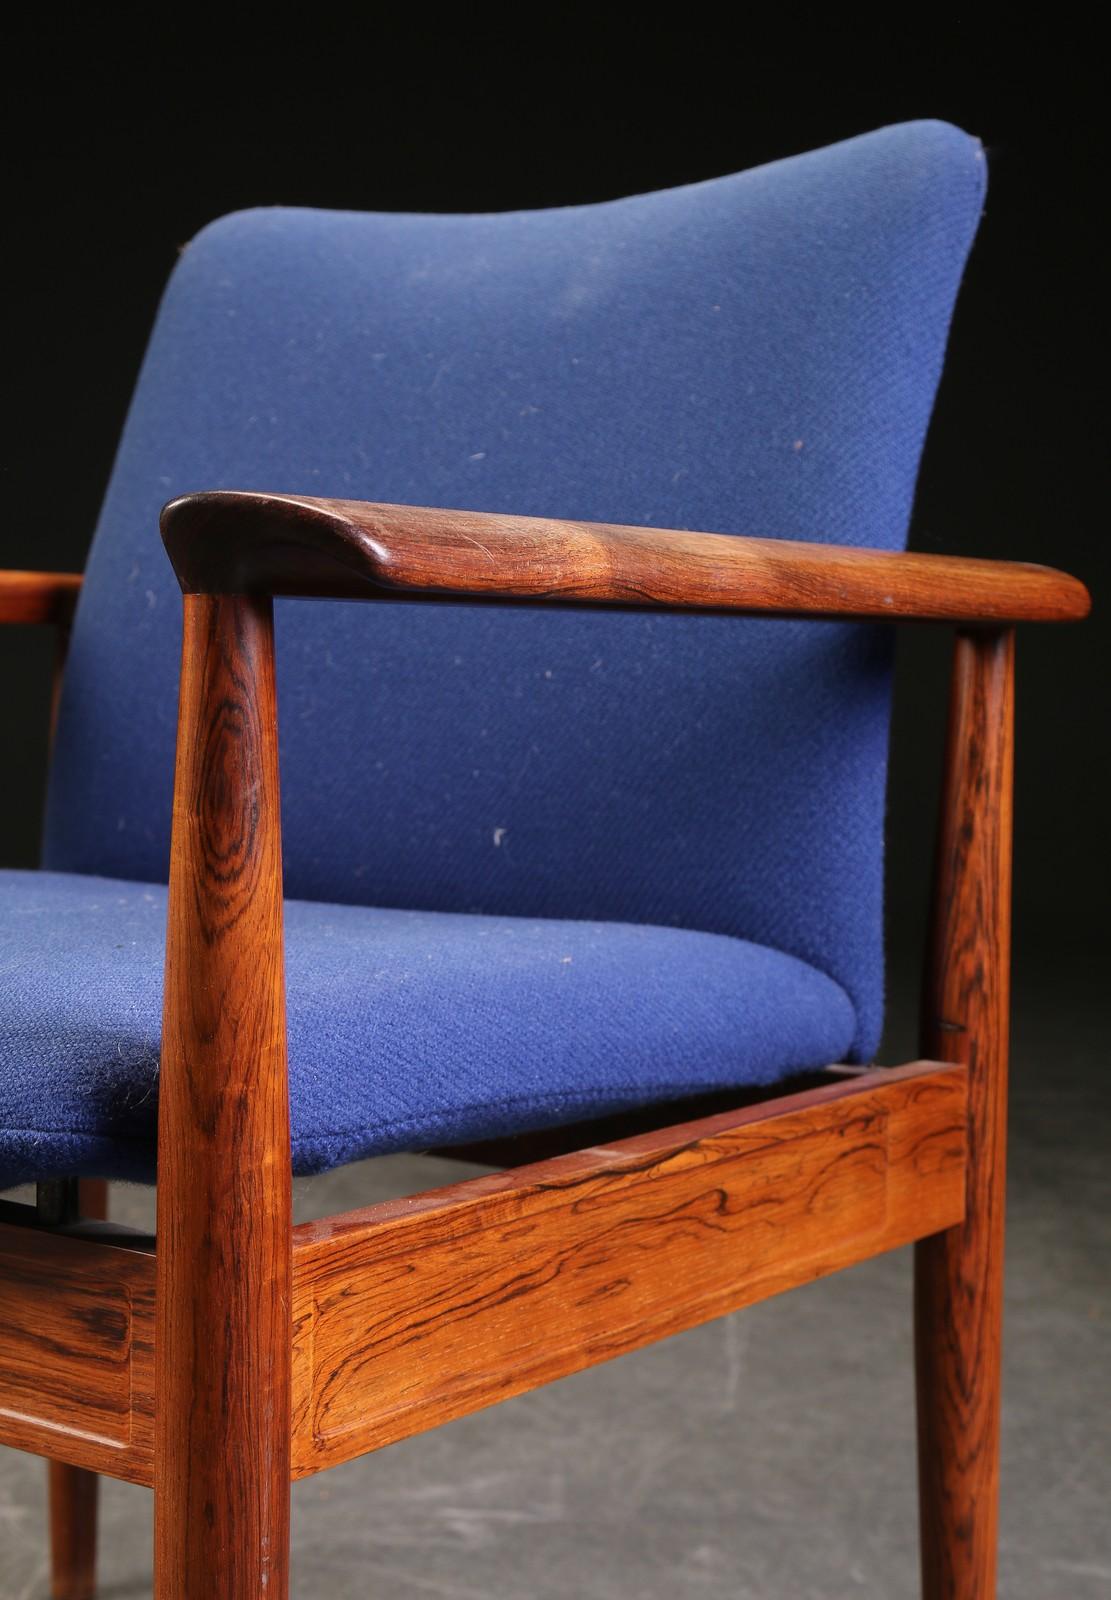 Finn Juhl, diplomat desk chair or armchair with frame in solid hardwood, model 209. Designed in 1963. Produced by France & Son.
Measures: H. 82 cm, SH. 44 cm, B. 69 cm.
Used but still in very good condition, new upholstery on request possible.
 